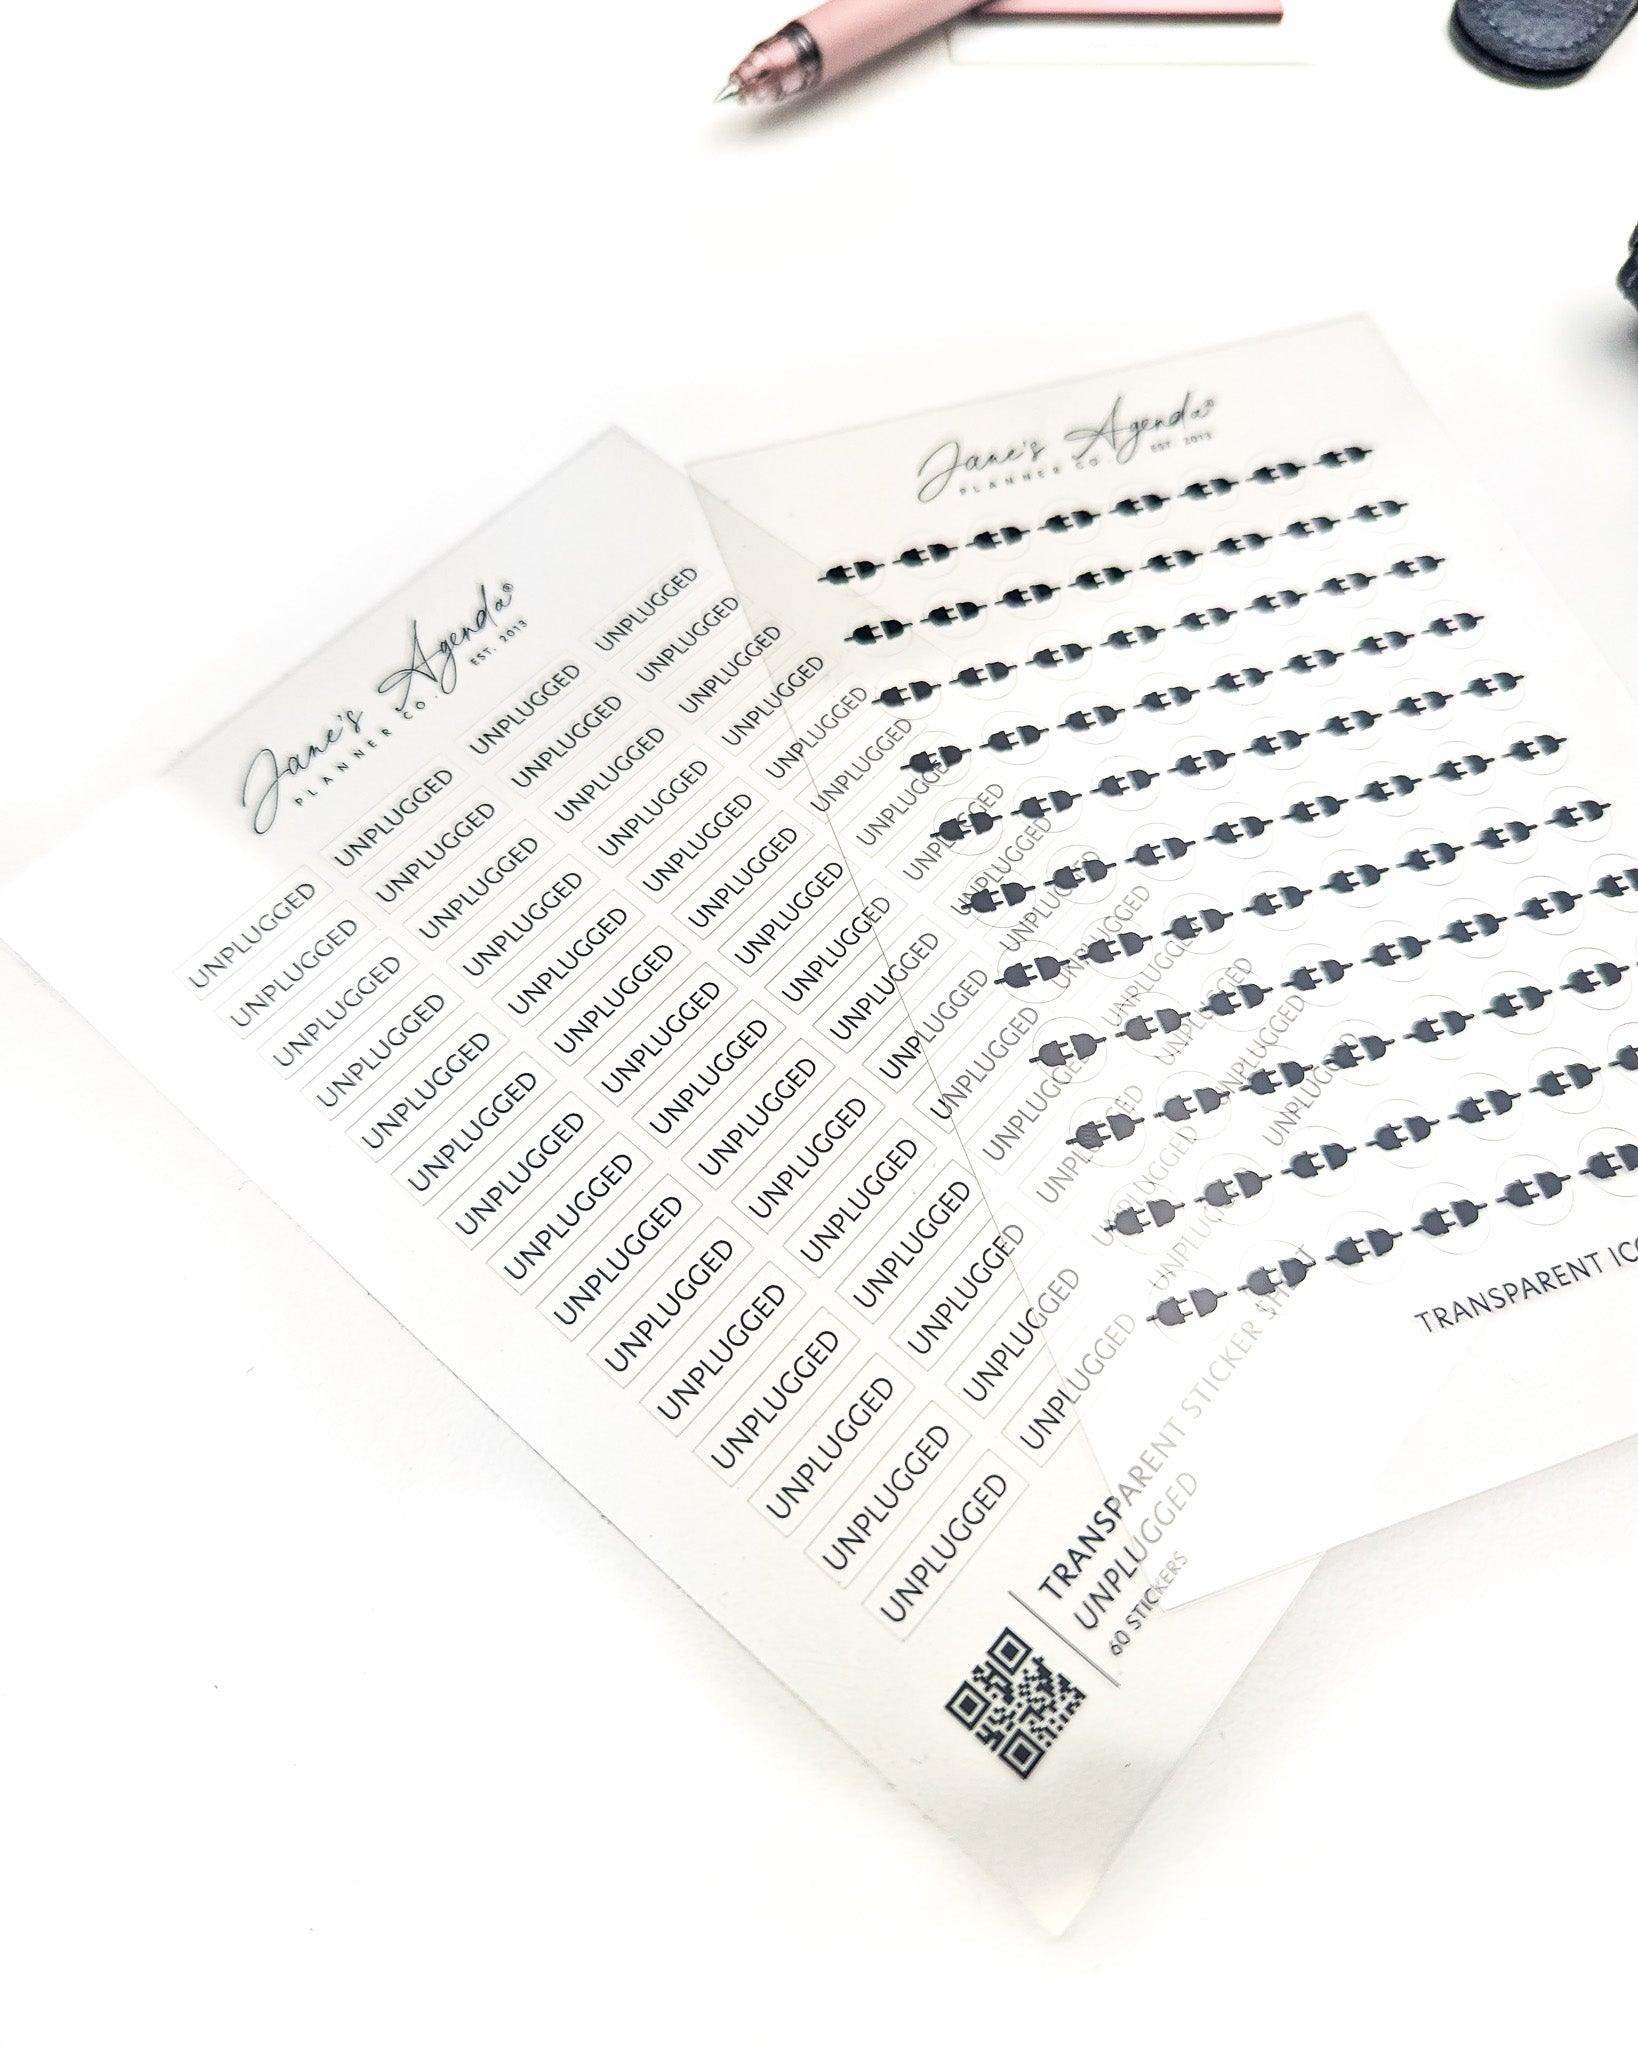 Clear plastic adhesive planner stickers by Jane's Agenda.